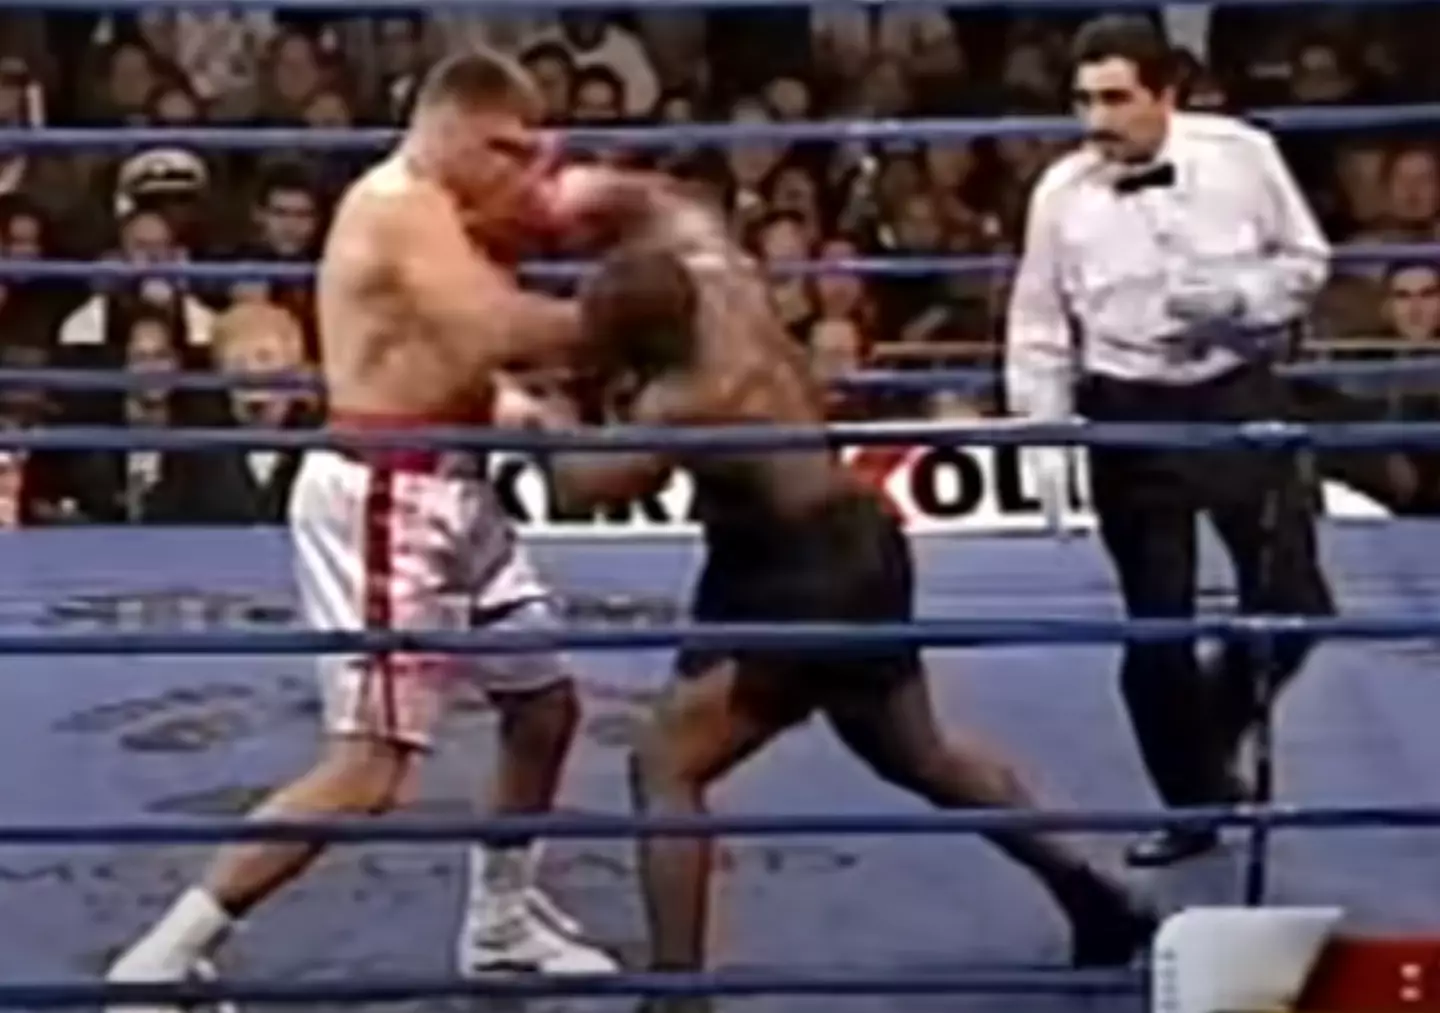 Tyson landed a devastating right hook in round one (